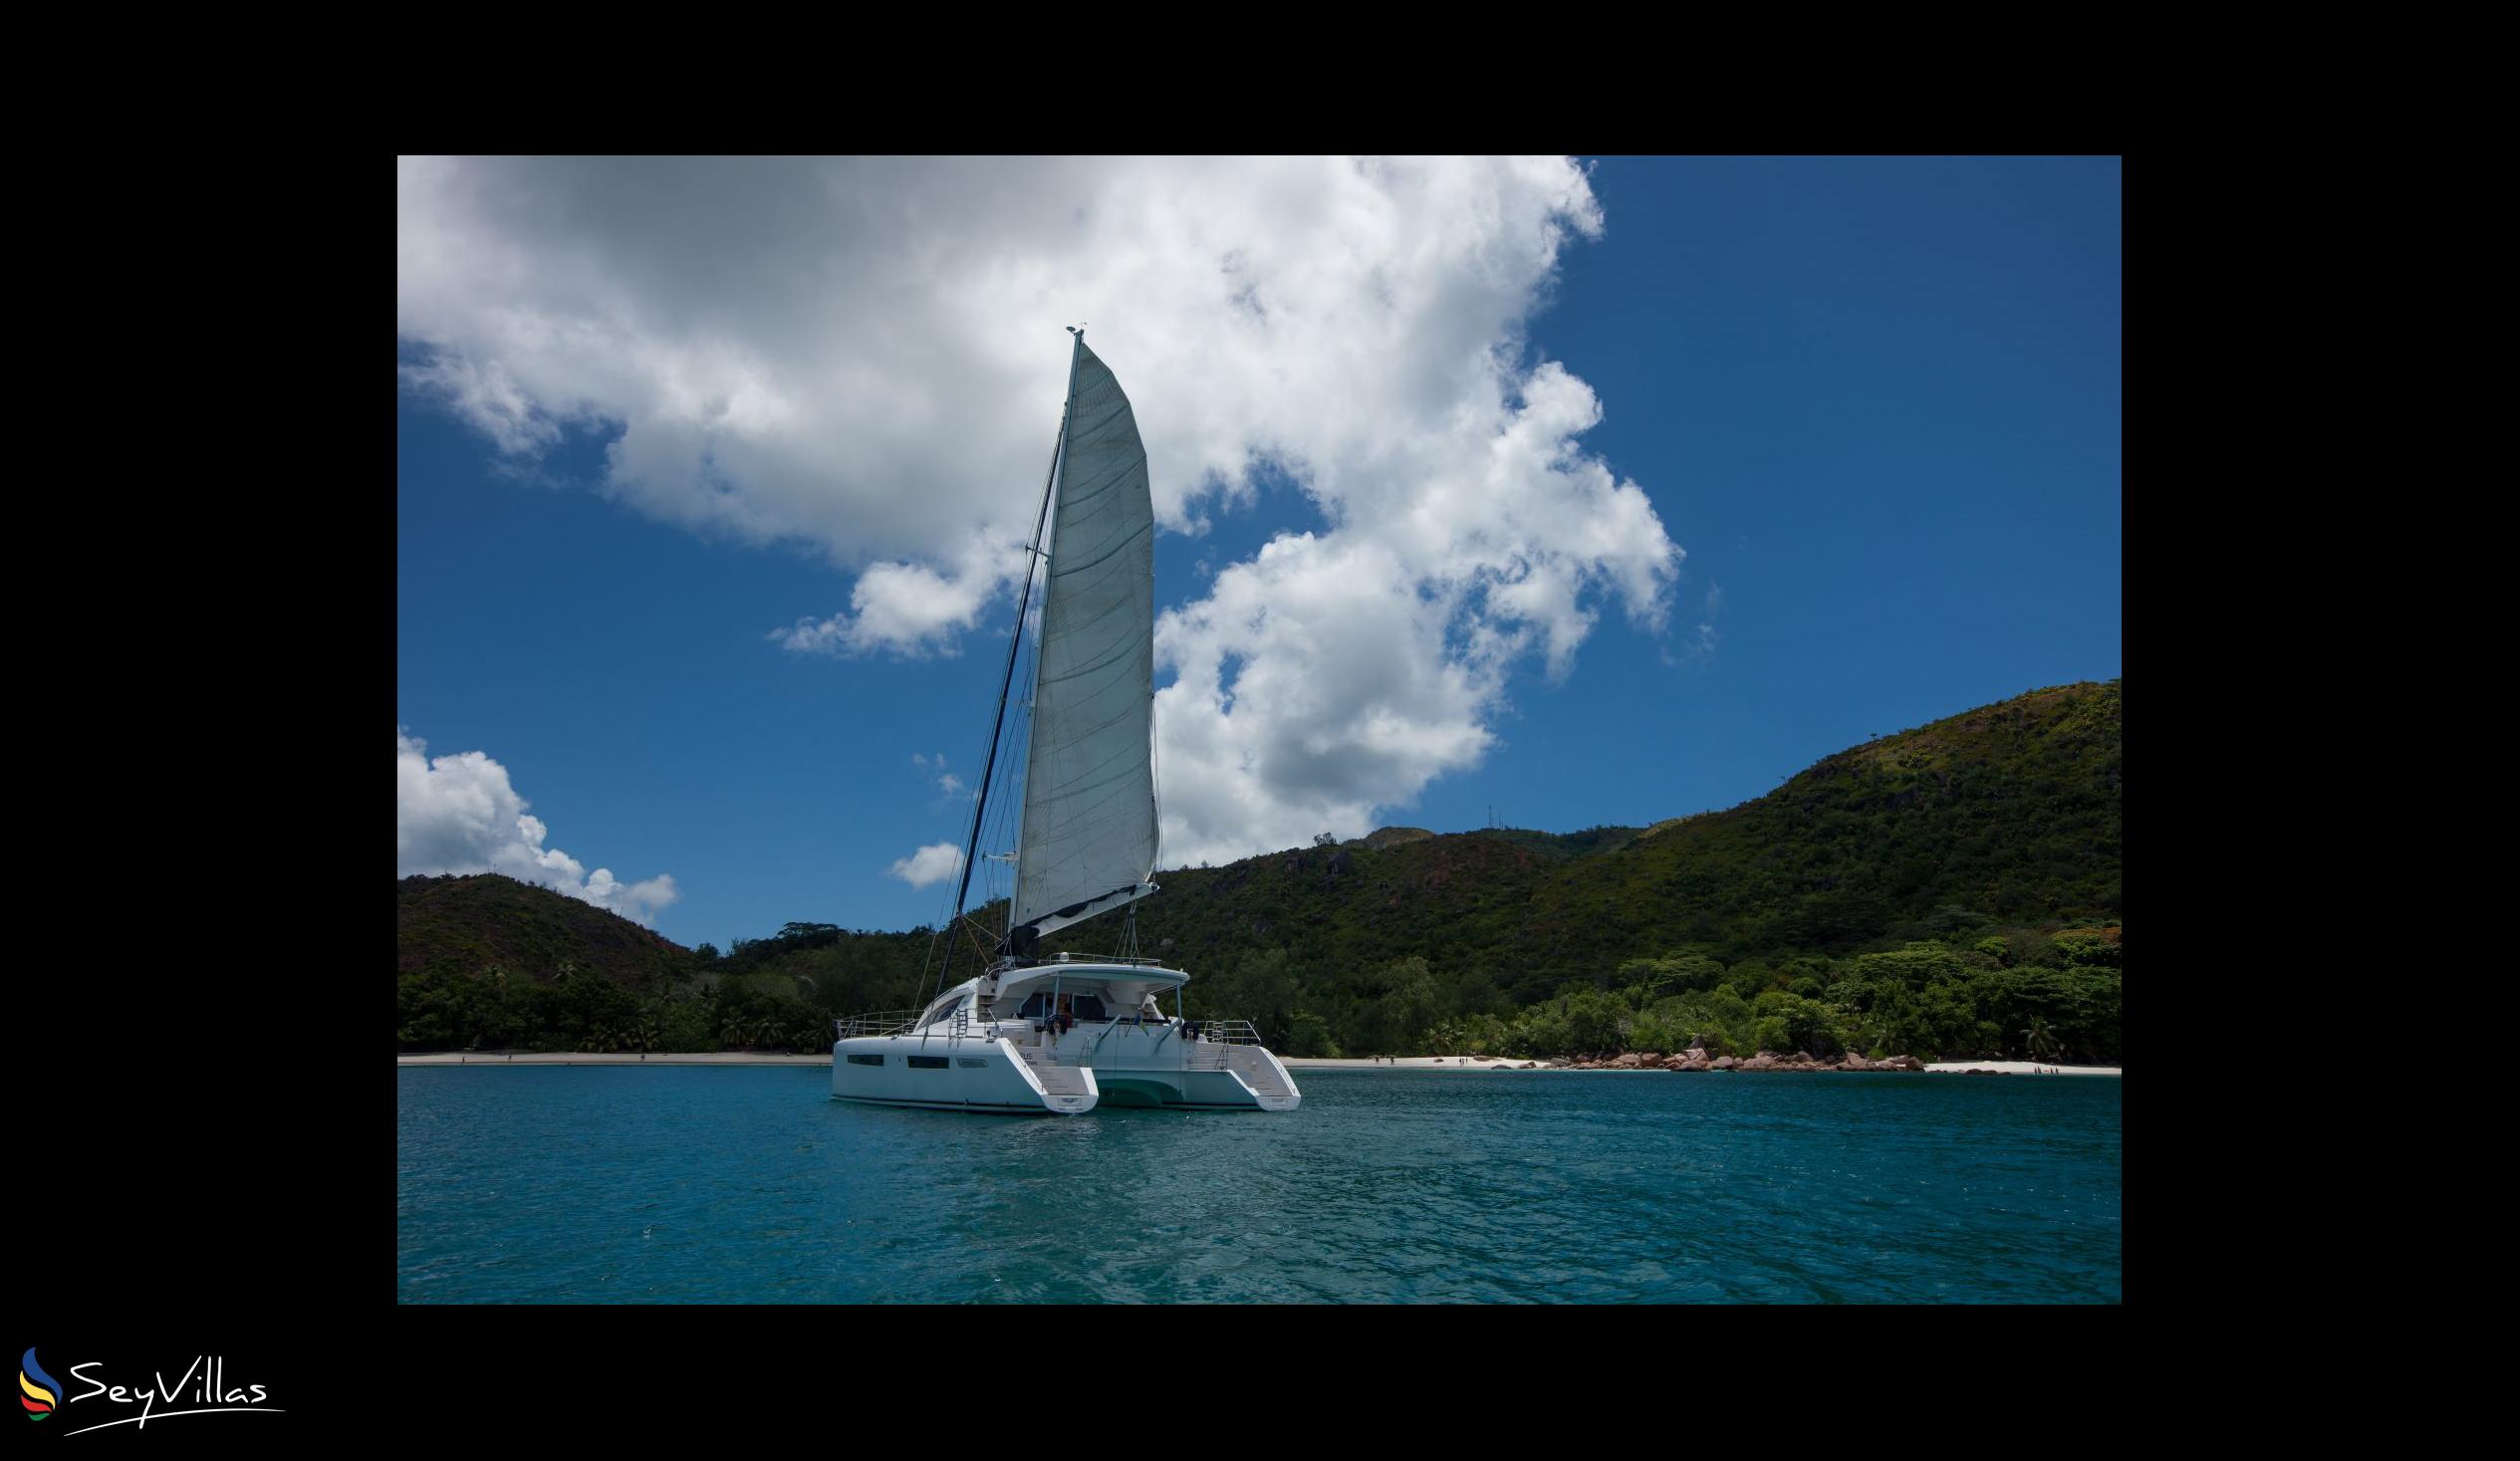 Foto 77: Seyscapes Yacht Charter - Charter completo Cirrus - Seychelles (Seychelles)